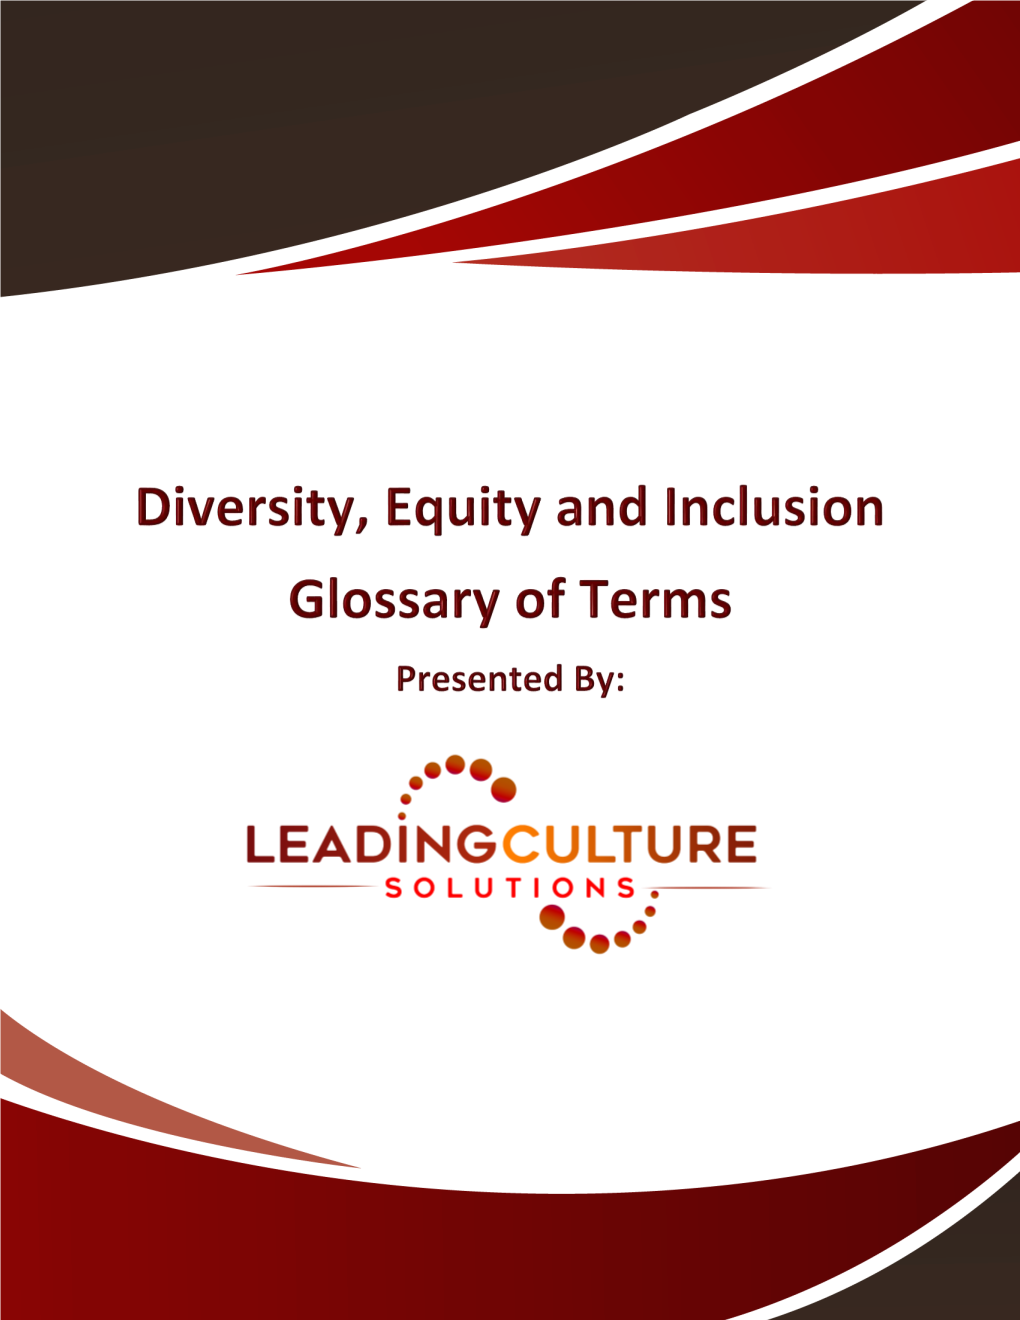 Leading Culture Solutions 2021 Diversity, Equity and Inclusion - Glossary of Terms